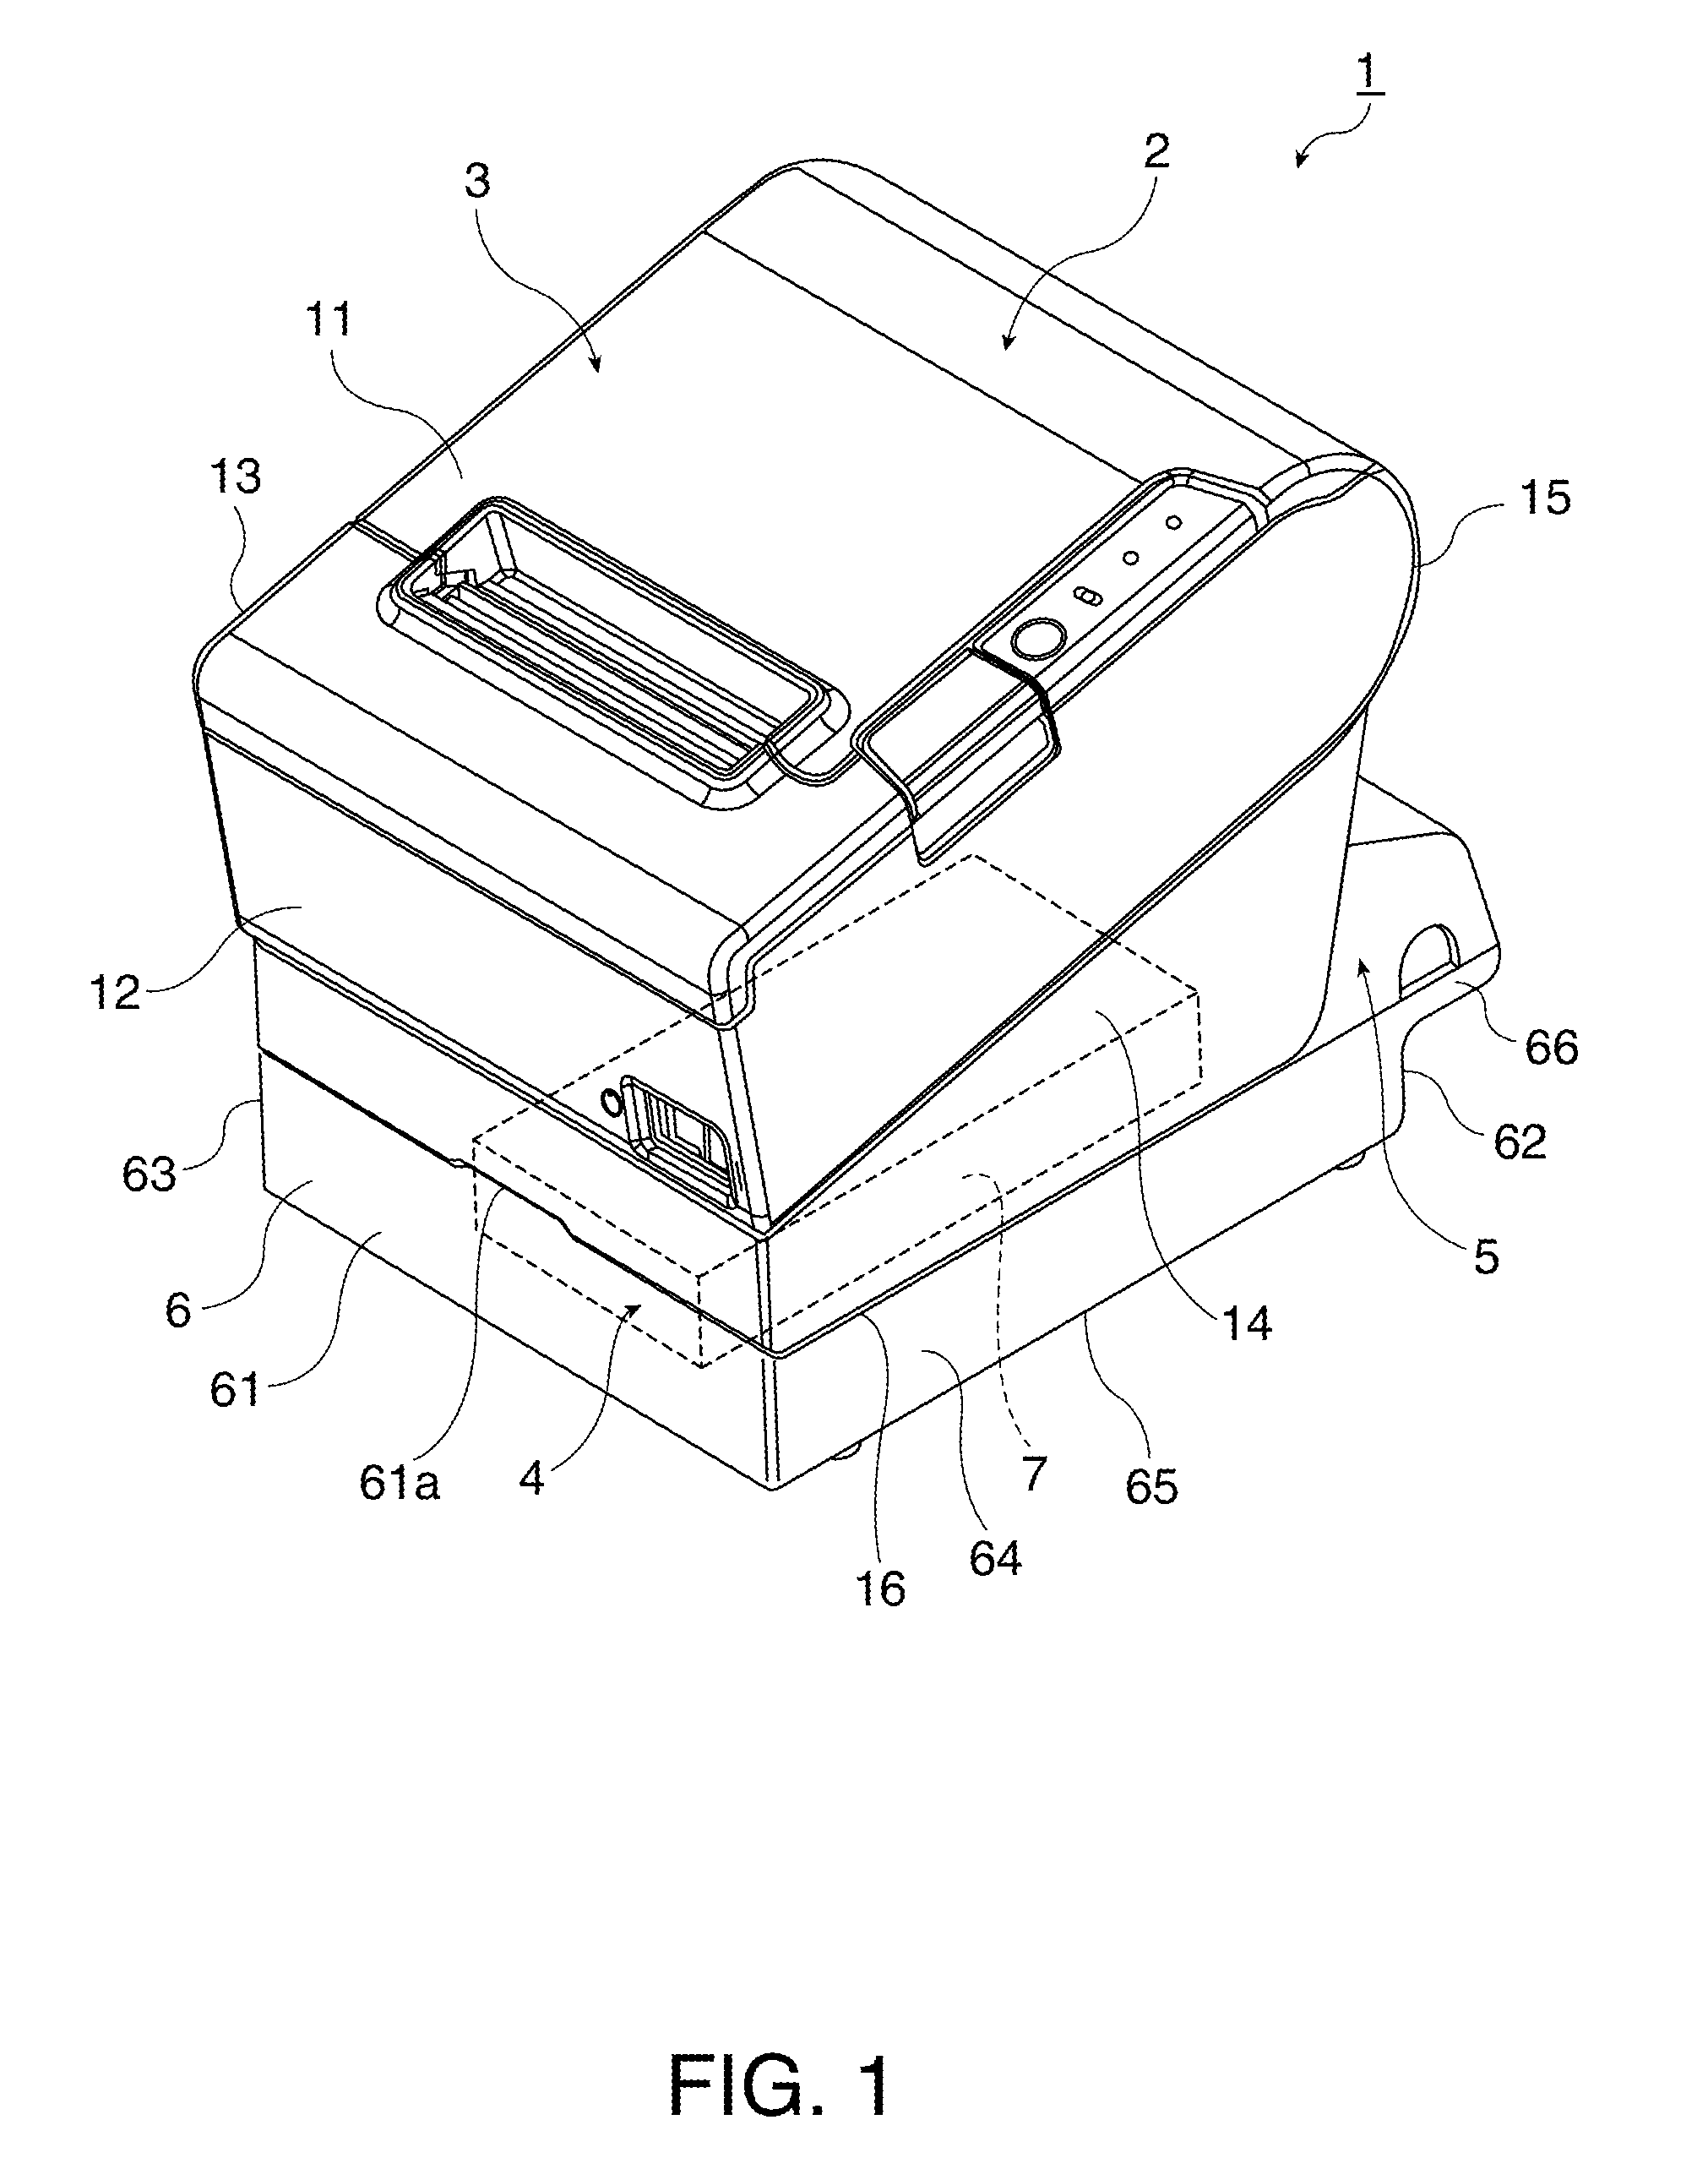 AC adapter unit, storage tray for an AC adapter and electronic device